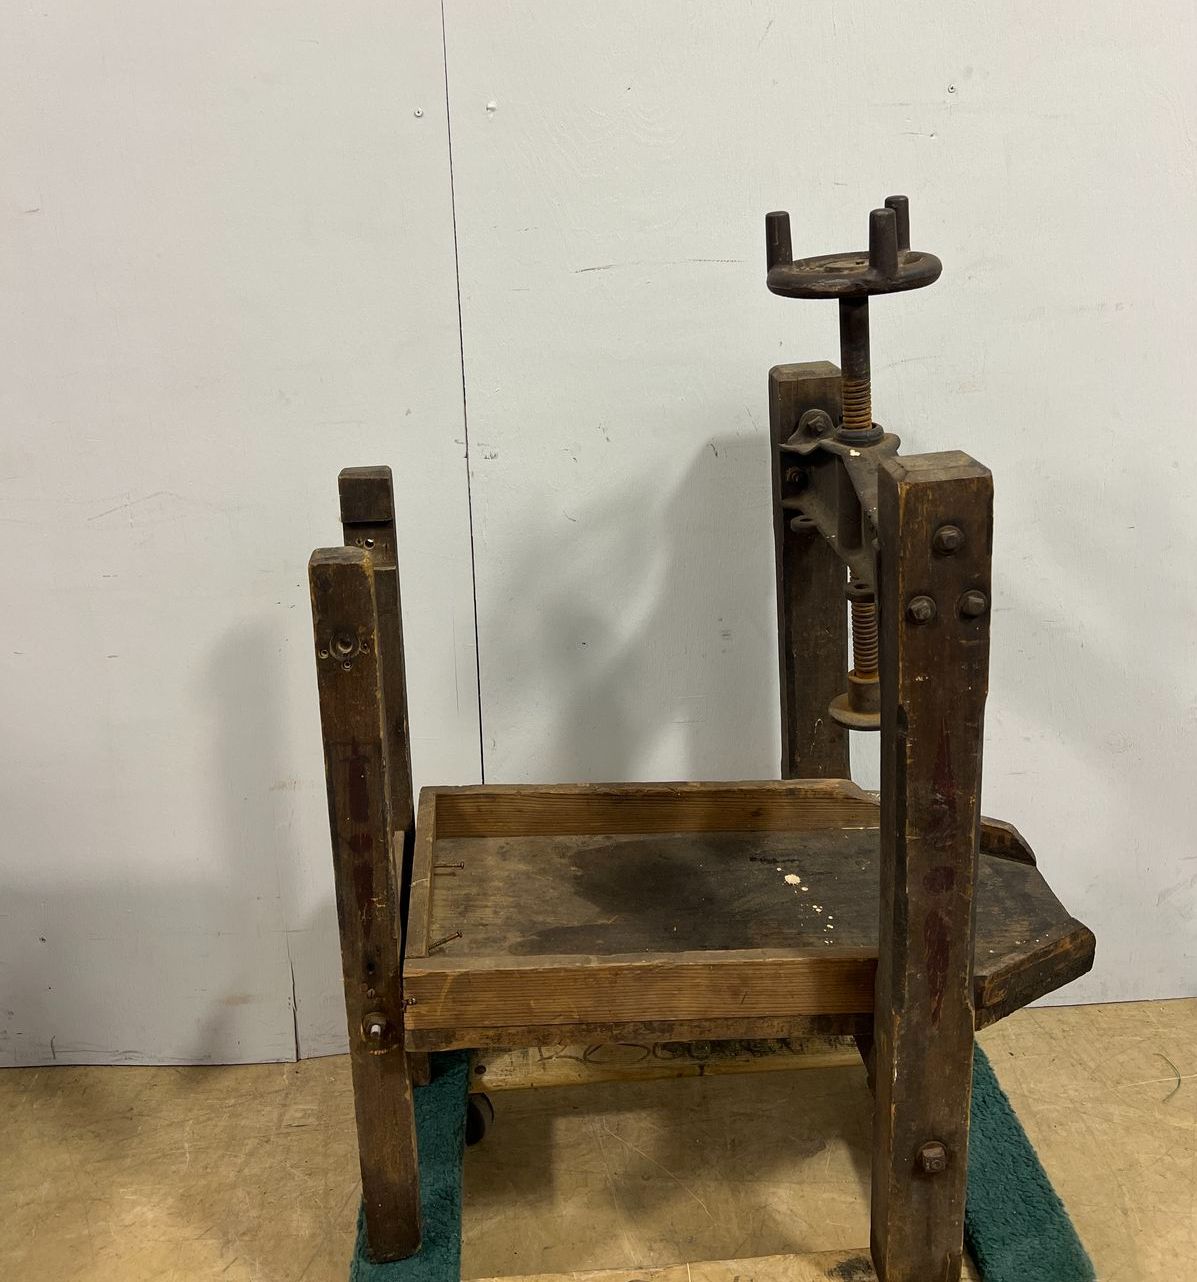 Pieces of an Antique Wooden Wine / Cider Making Press Perfect for Eclectic Decor